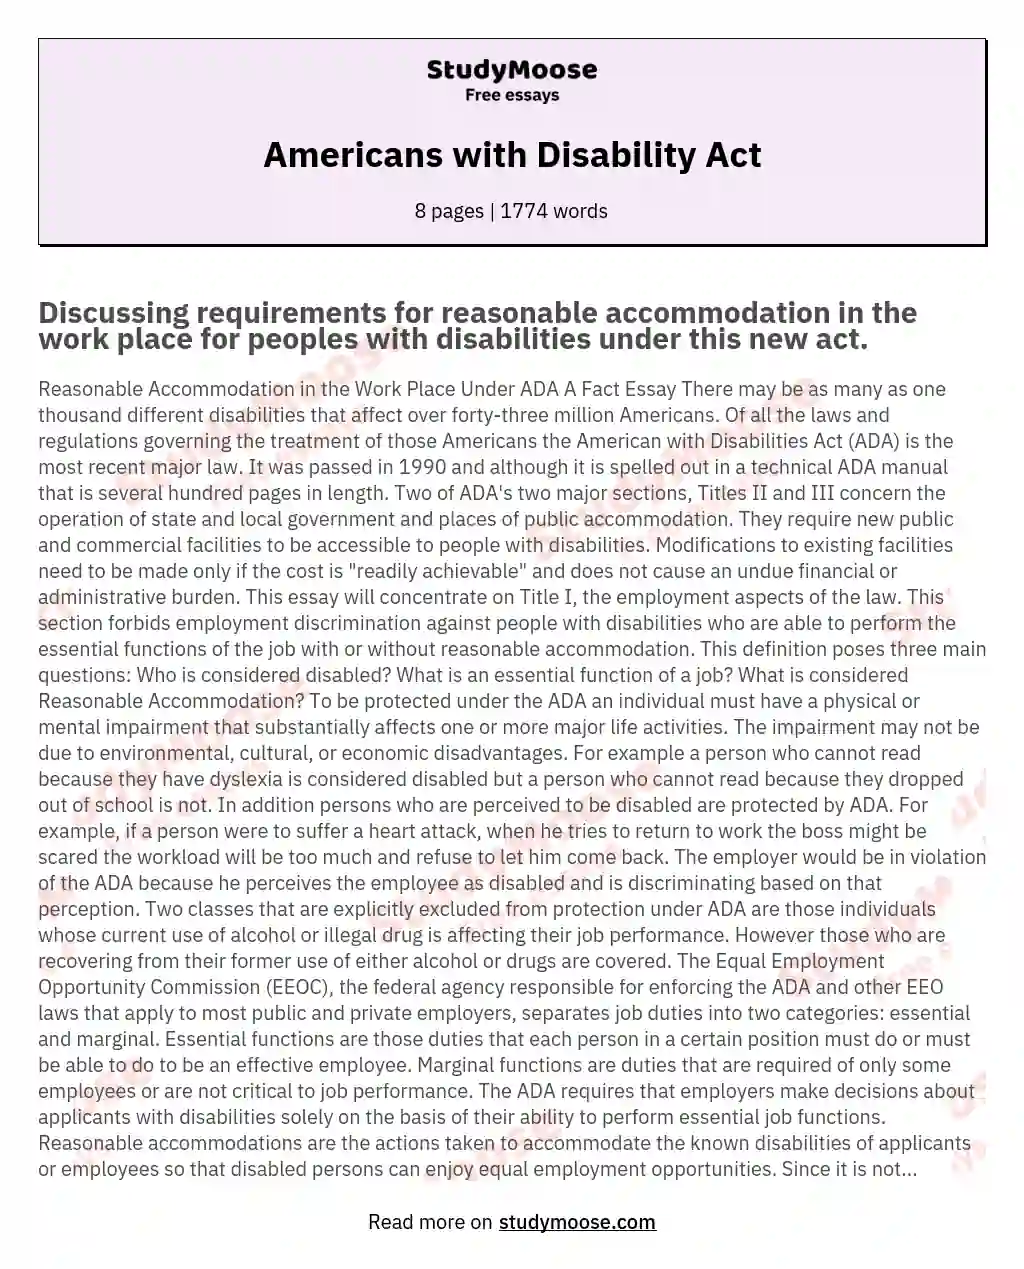 Americans with Disability Act essay